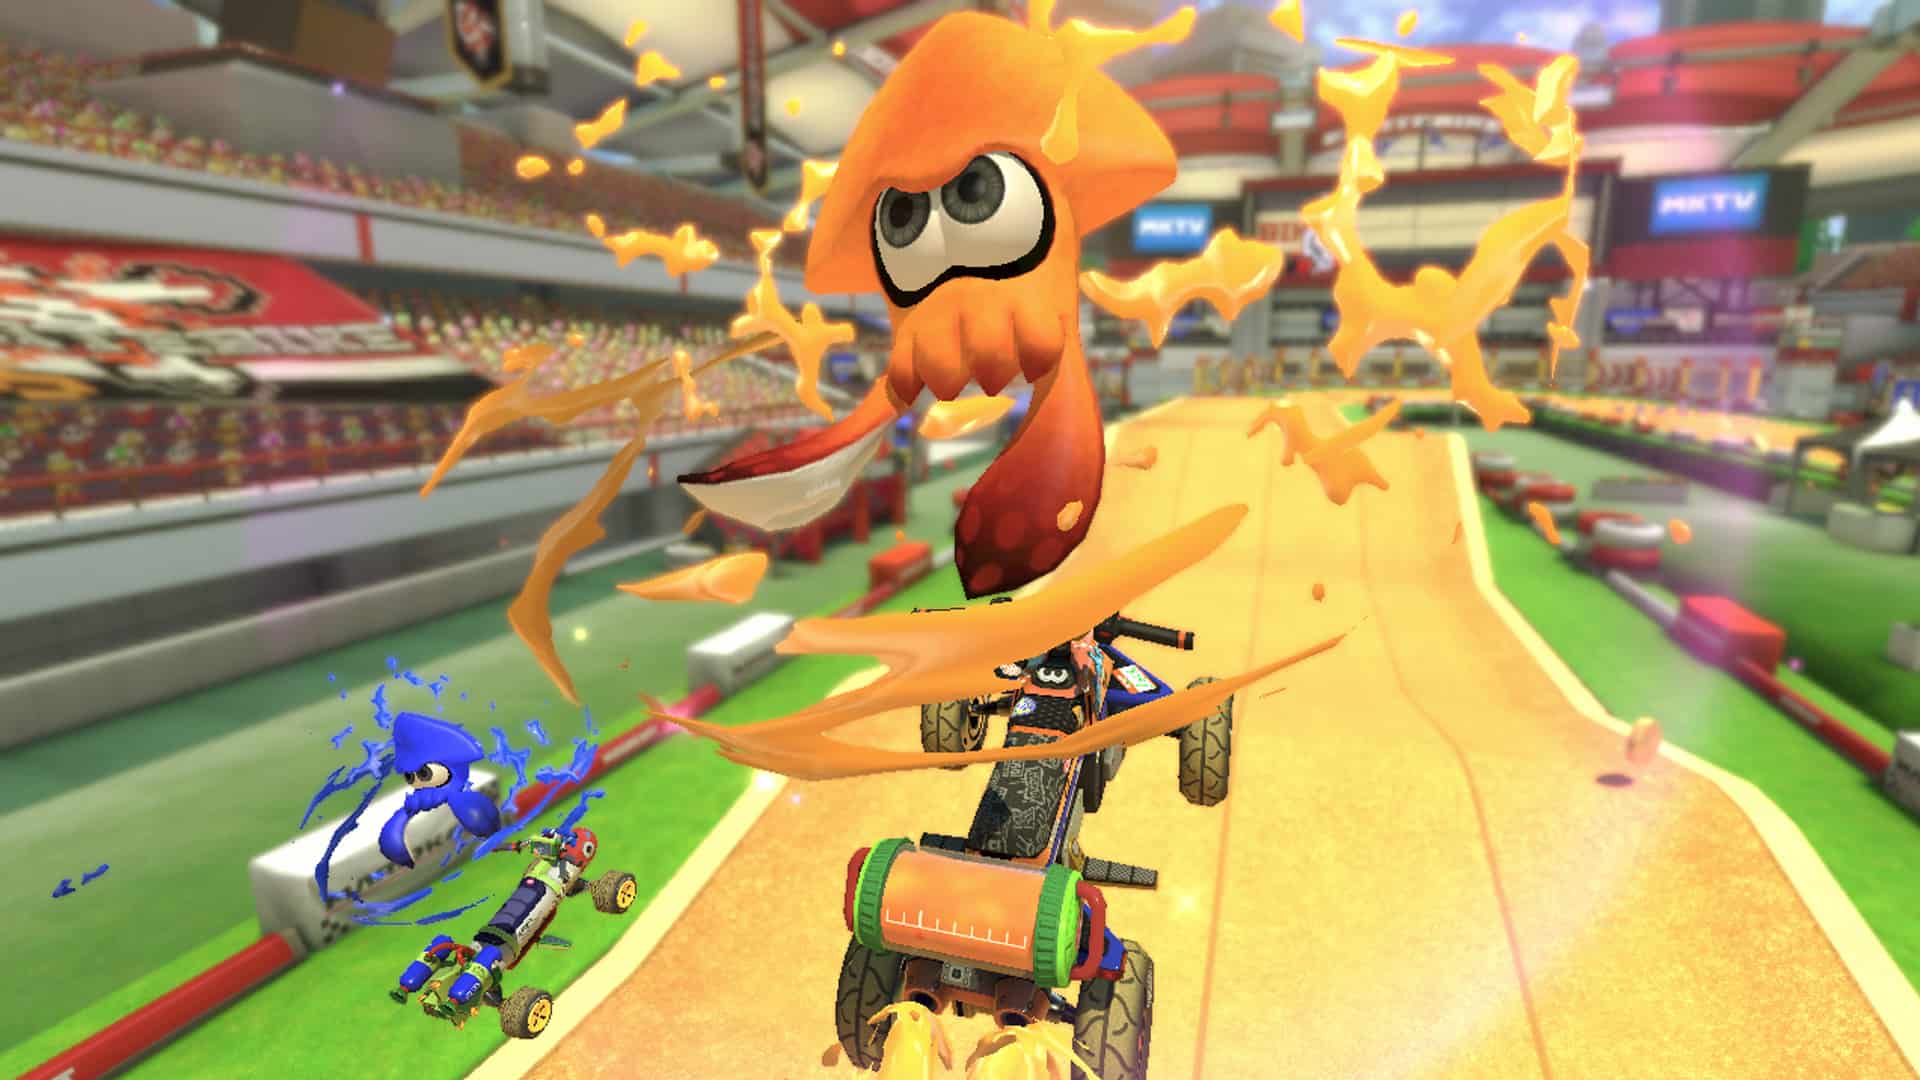 Look out for lava in the Mario Kart Tour Bowser Tour